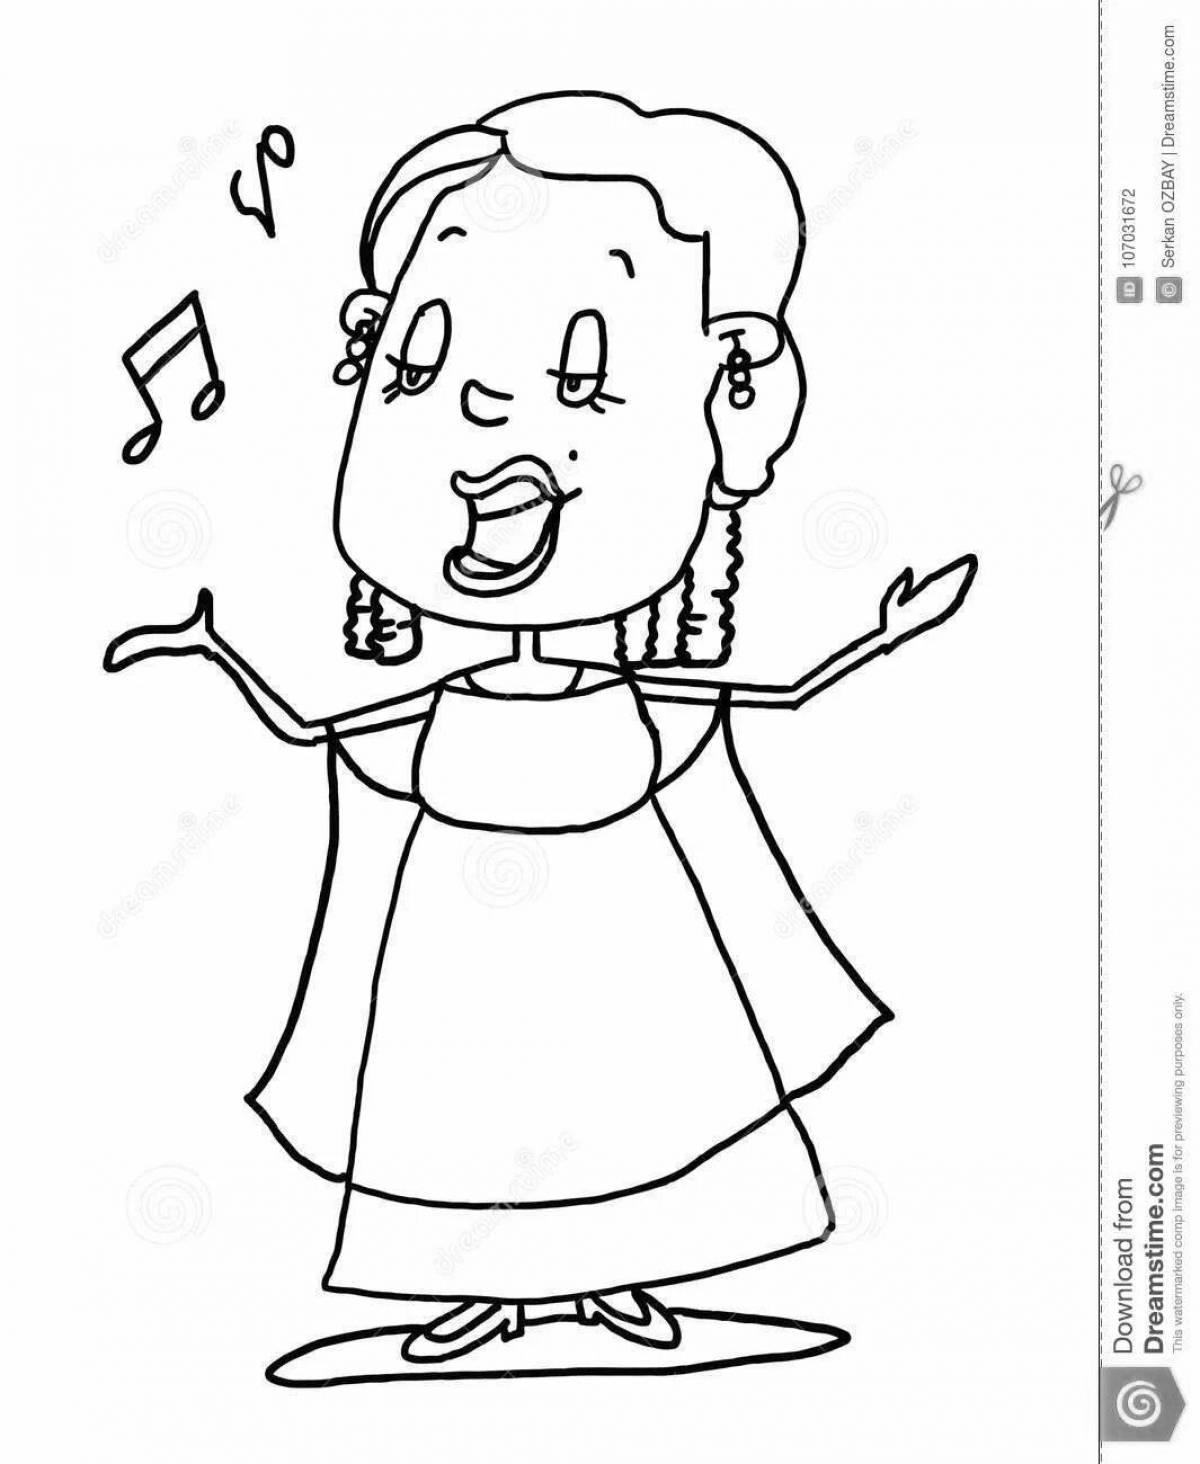 Glowing singer coloring page for kids